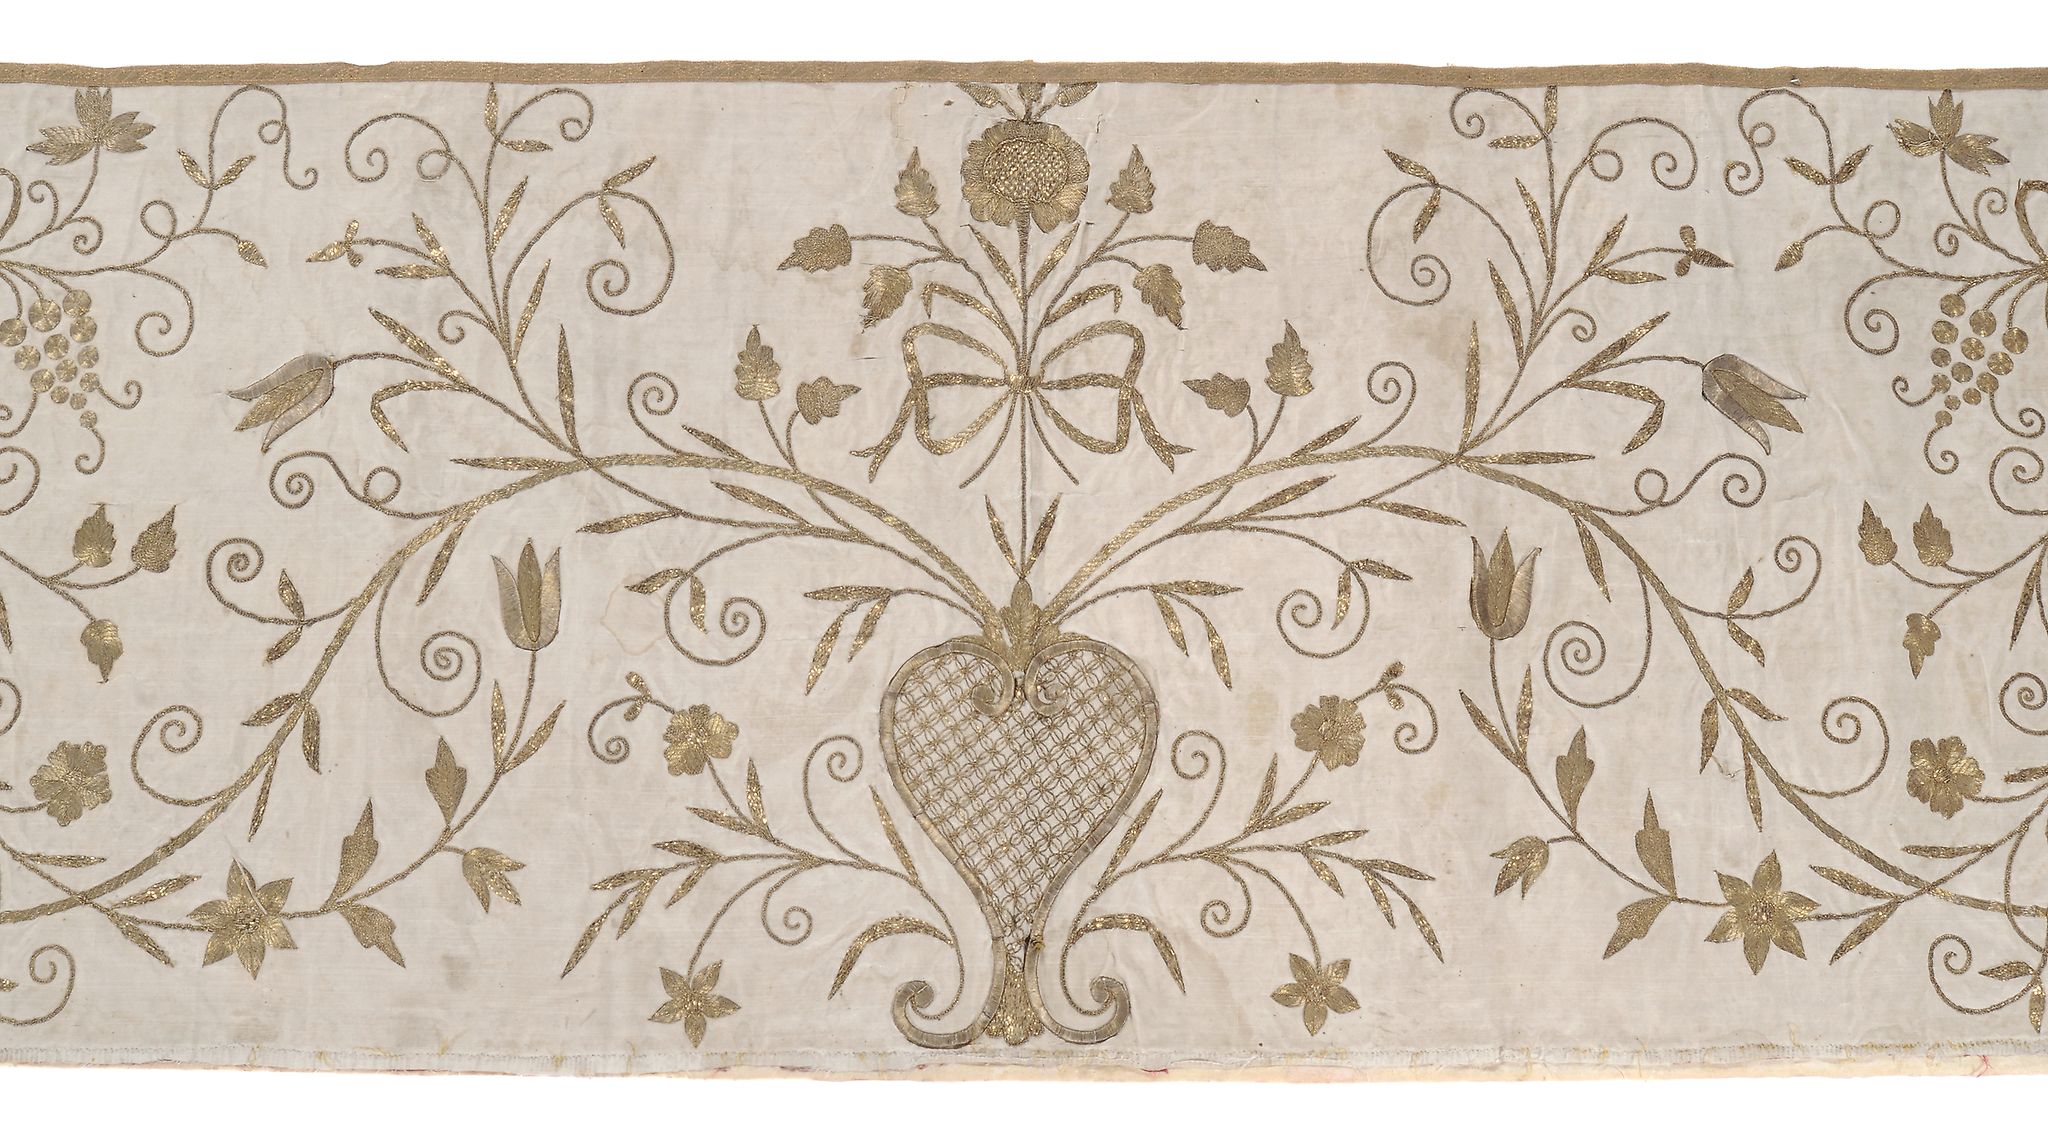 A Continental late 17th century gilt-metal embroidered floral silk panel - Image 4 of 8